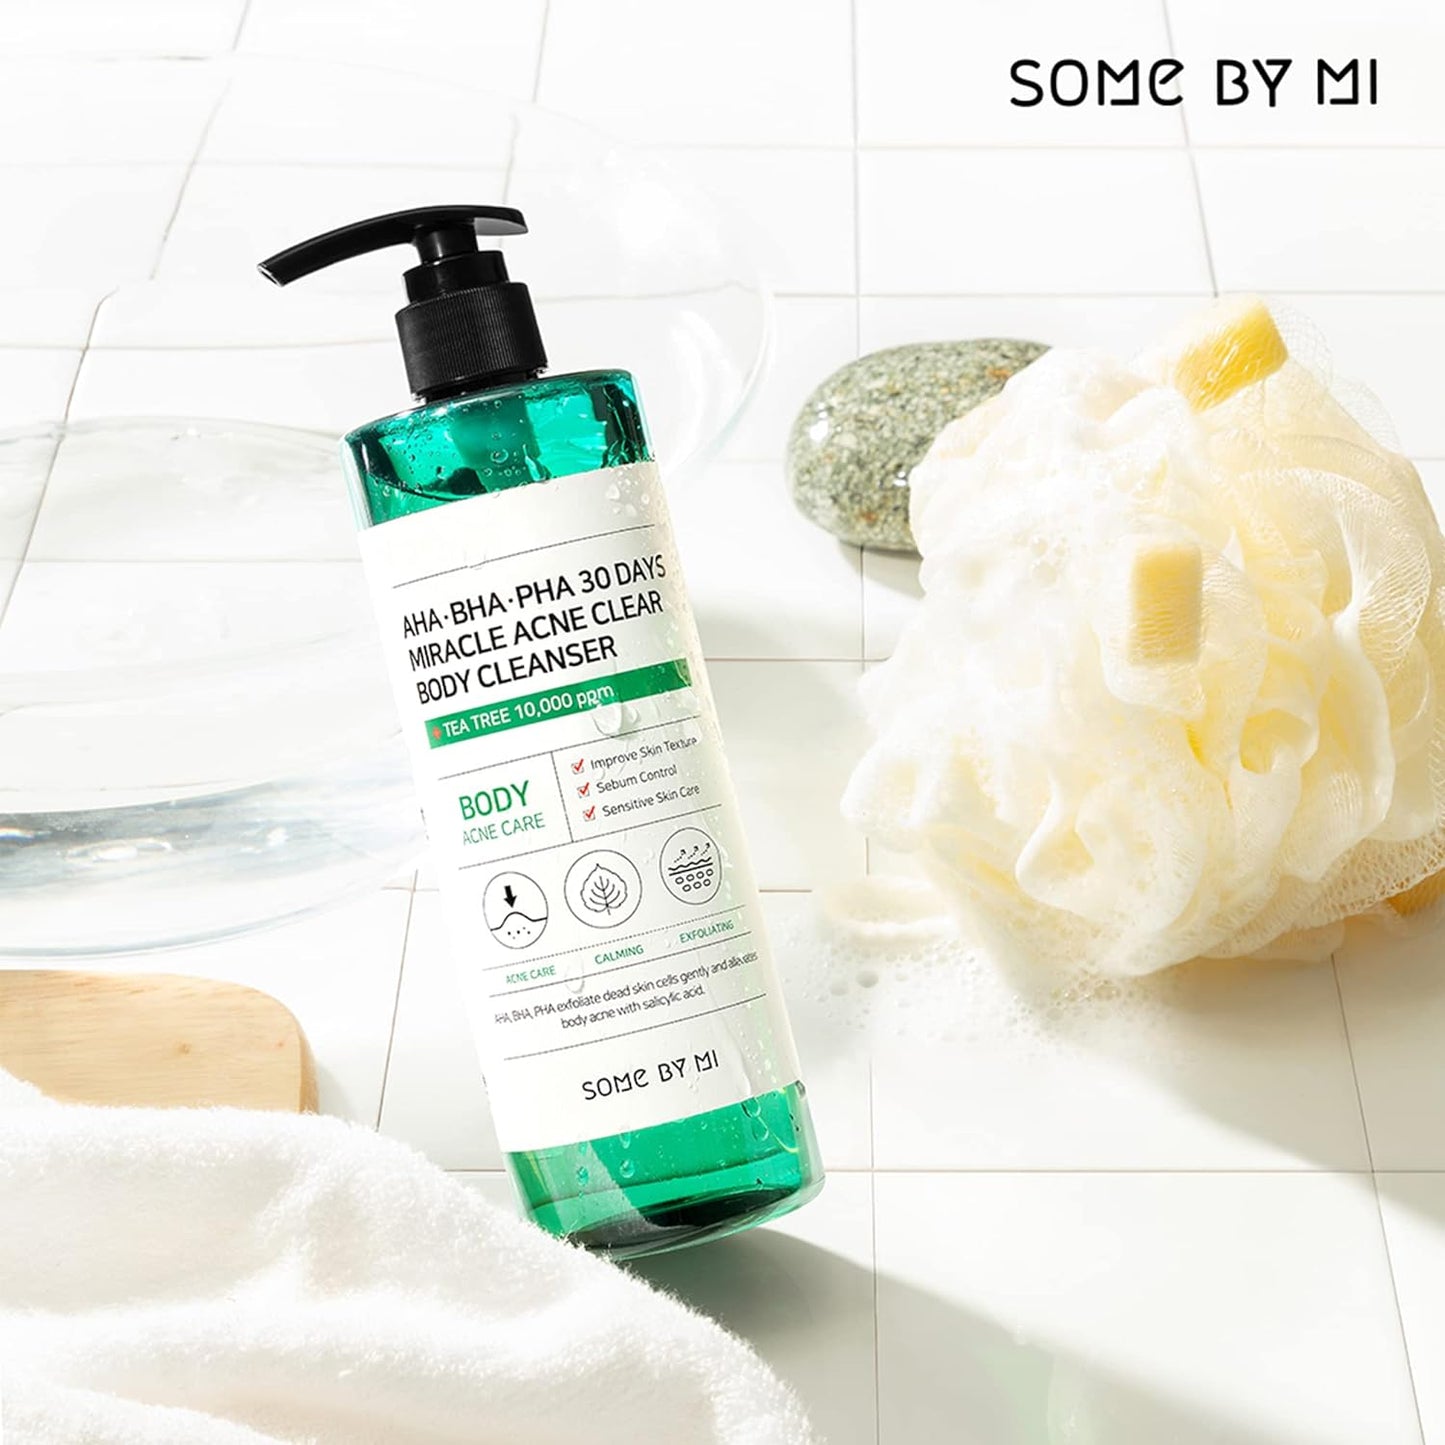 SOME BY MI | AHA BHA PHA 30 Days Miracle Clear Body Cleanser 400g